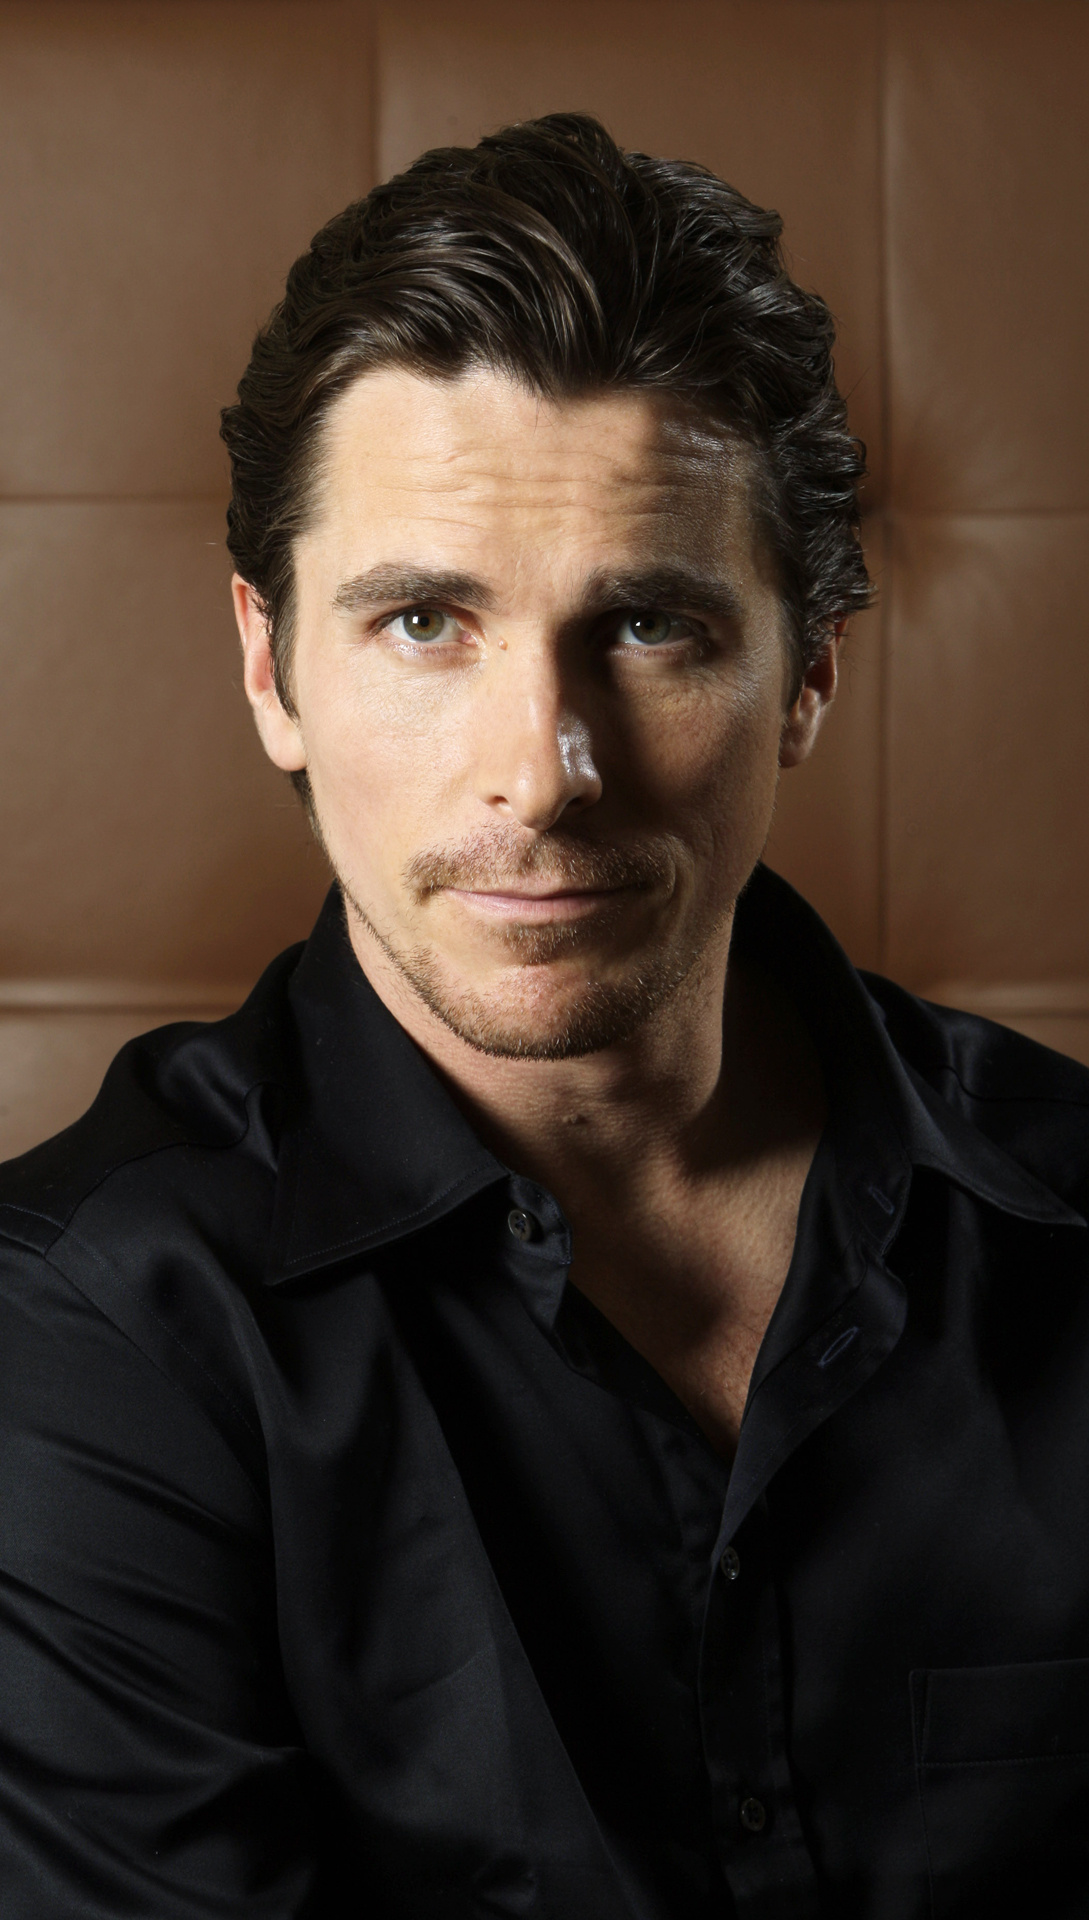 Christian Bale: Appeared in Terrence Malick's drama Knight of Cups. 1090x1920 HD Background.